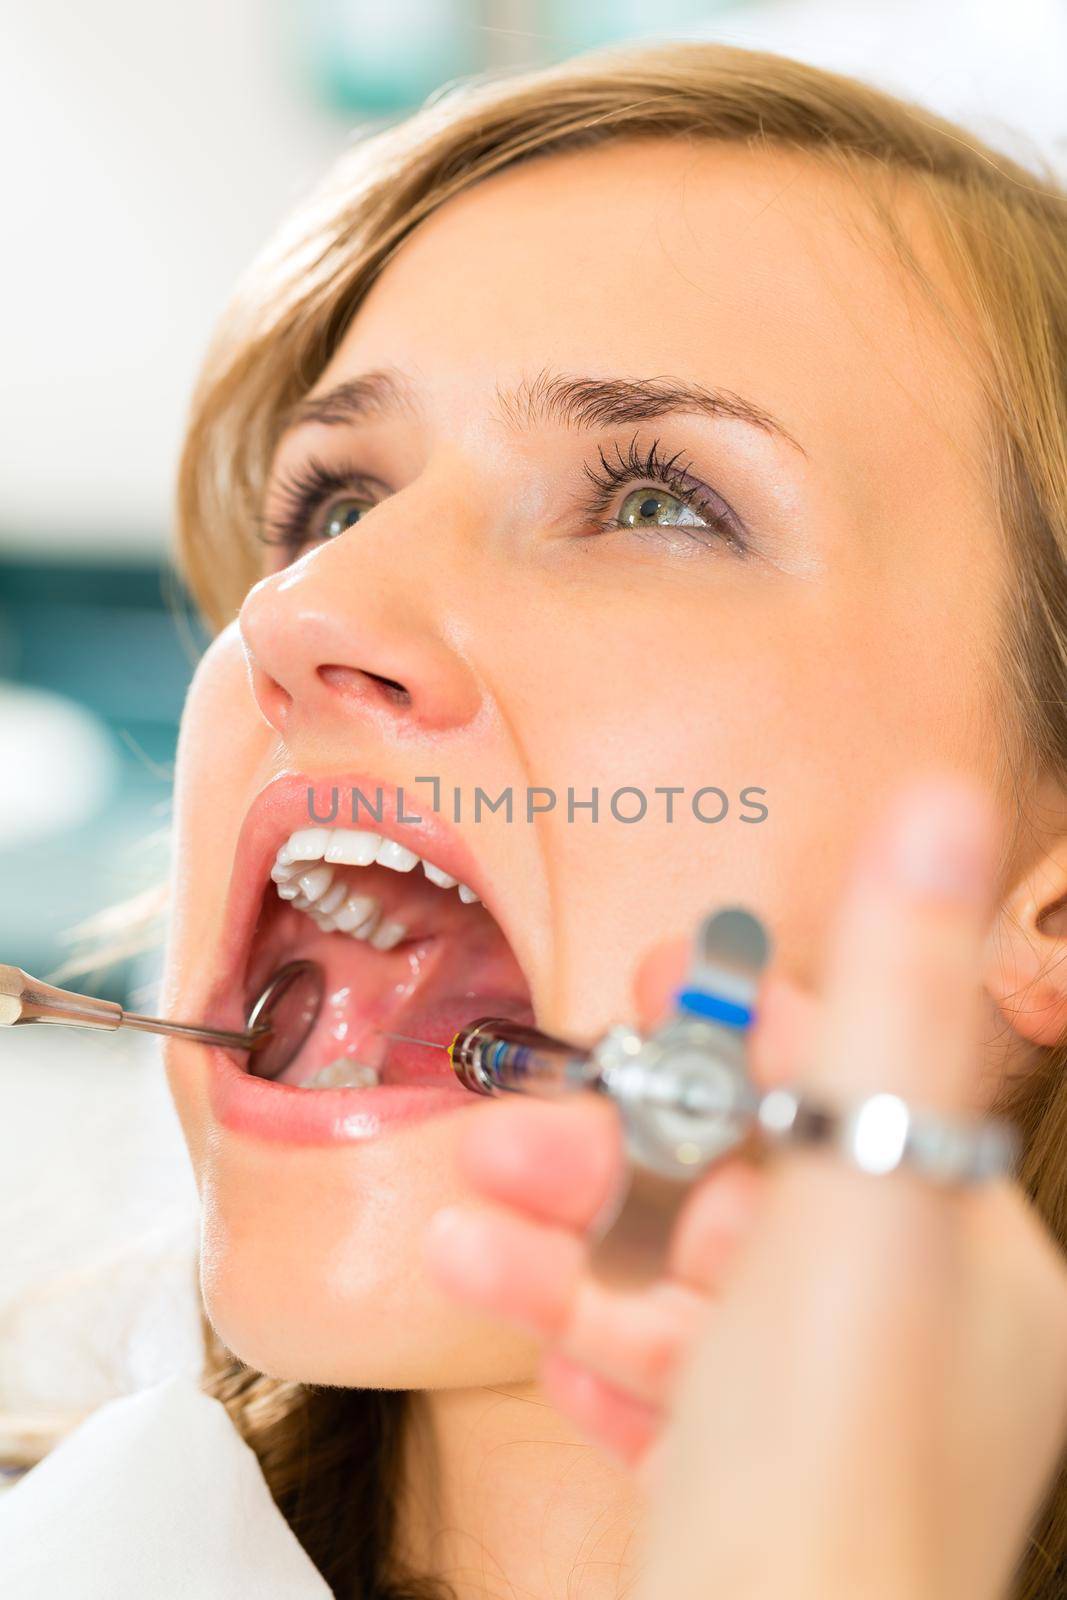 dentist holding a syringe and anesthetizing his patient